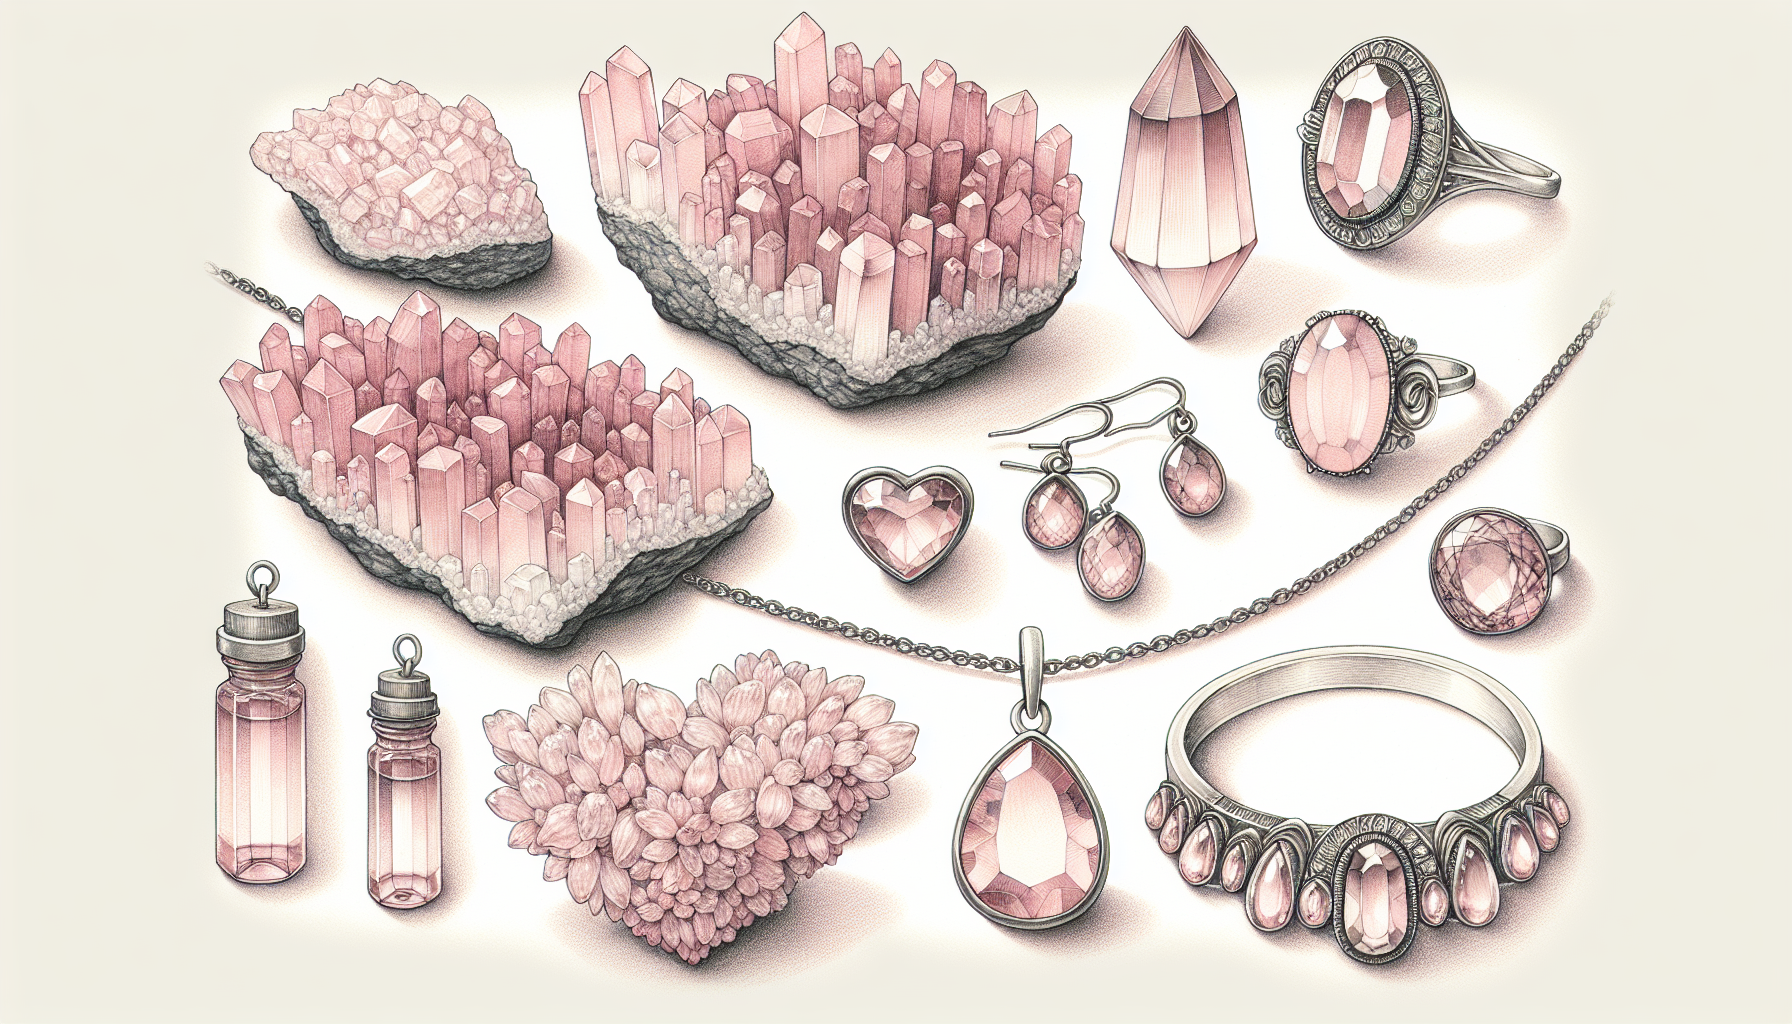 Illustration of rose quartz crystals and jewelry